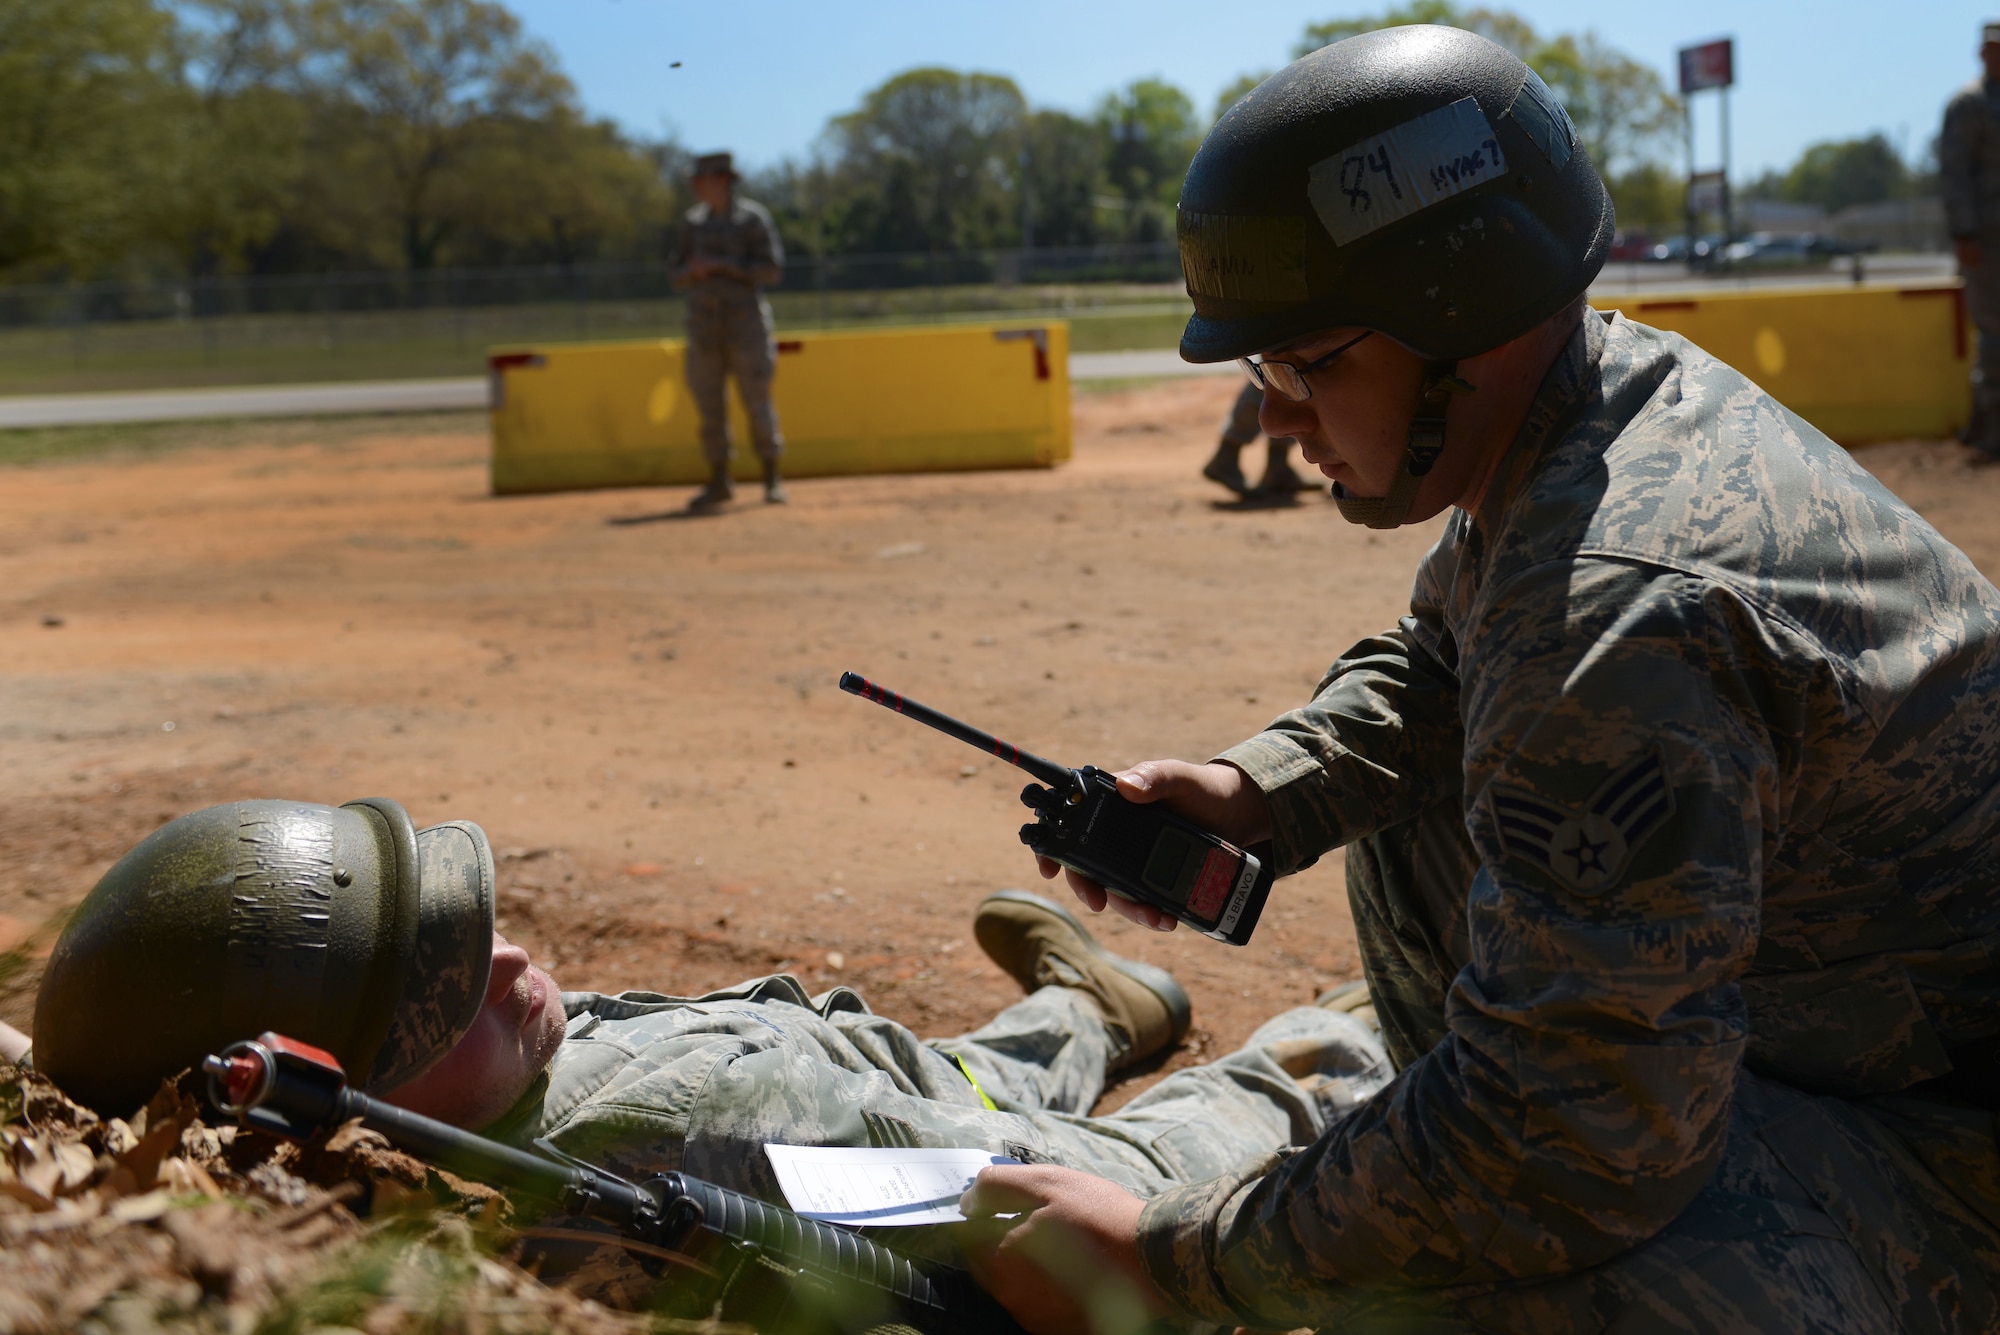 U.S. Air Force Senior Airman Remzo Rovcanin, 20th Civil Engineer Squadron heating, ventilation, and air conditioning technician, kneels over an injured comrade after a simulated improvised explosive device explosion during operational readiness exercise Weasel Victory 16-08 at Shaw Air Force Base, S.C., March 23, 2016. Rovcanin called in 20th Security Forces Squadron Airmen to help secure the area before buddy-carrying his wingman to a safe location. The simulated attack tested the Airmen’s buddy-care skills and ability to subdue an armed combatant. (U.S Air Force photo by Airman 1st Class Destinee Dougherty)